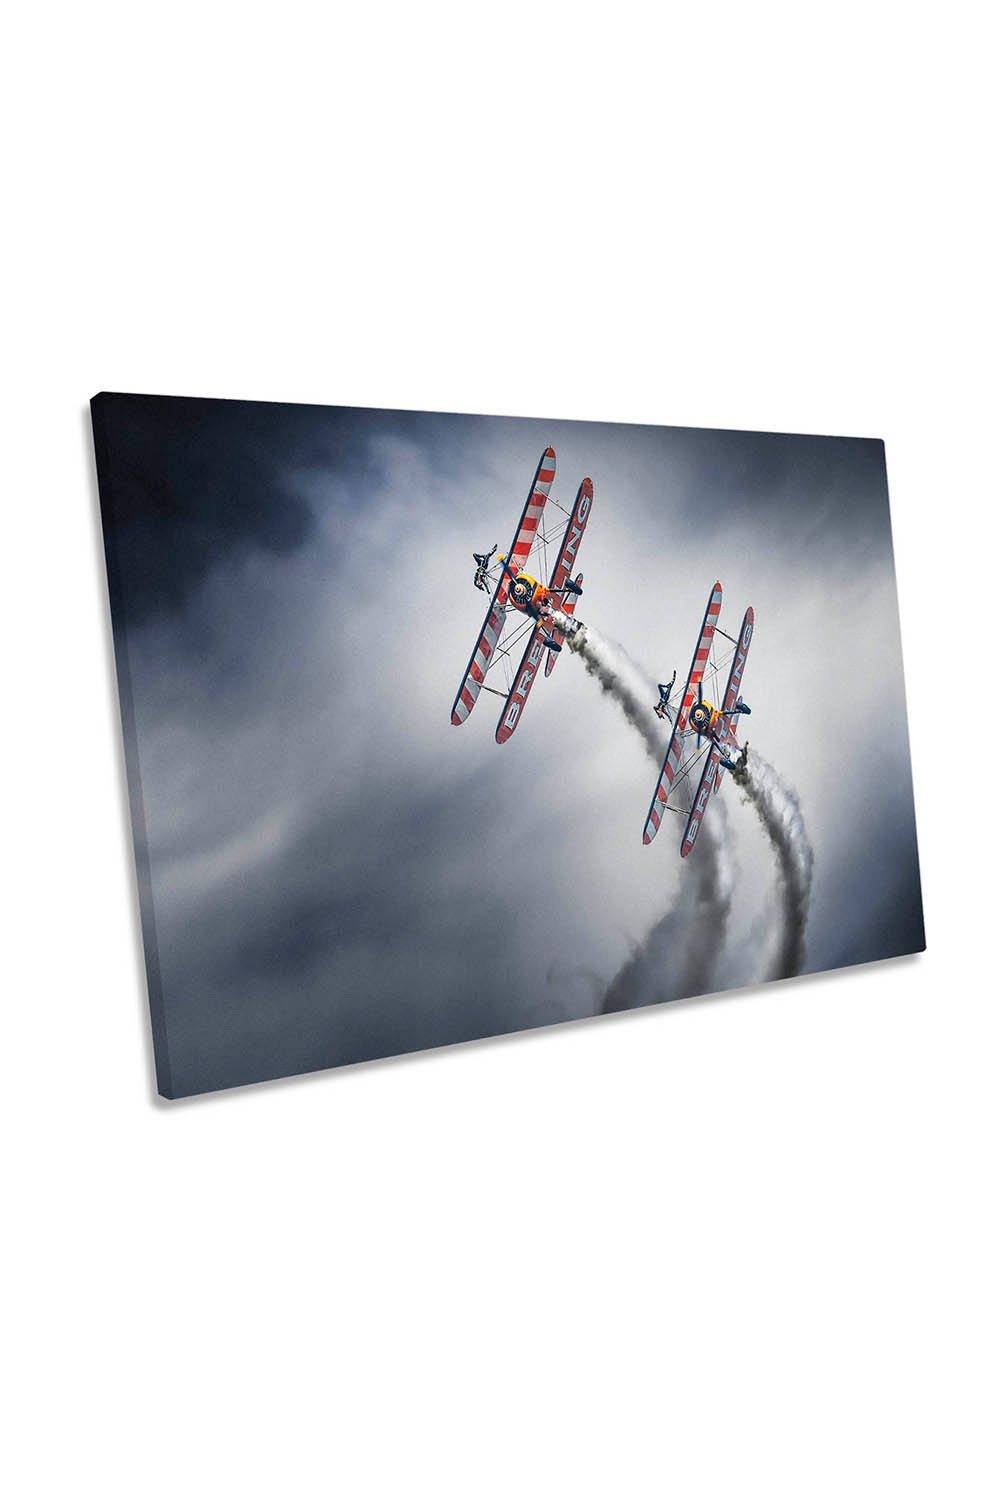 Wing Walkers Planes Airshow Canvas Wall Art Picture Print